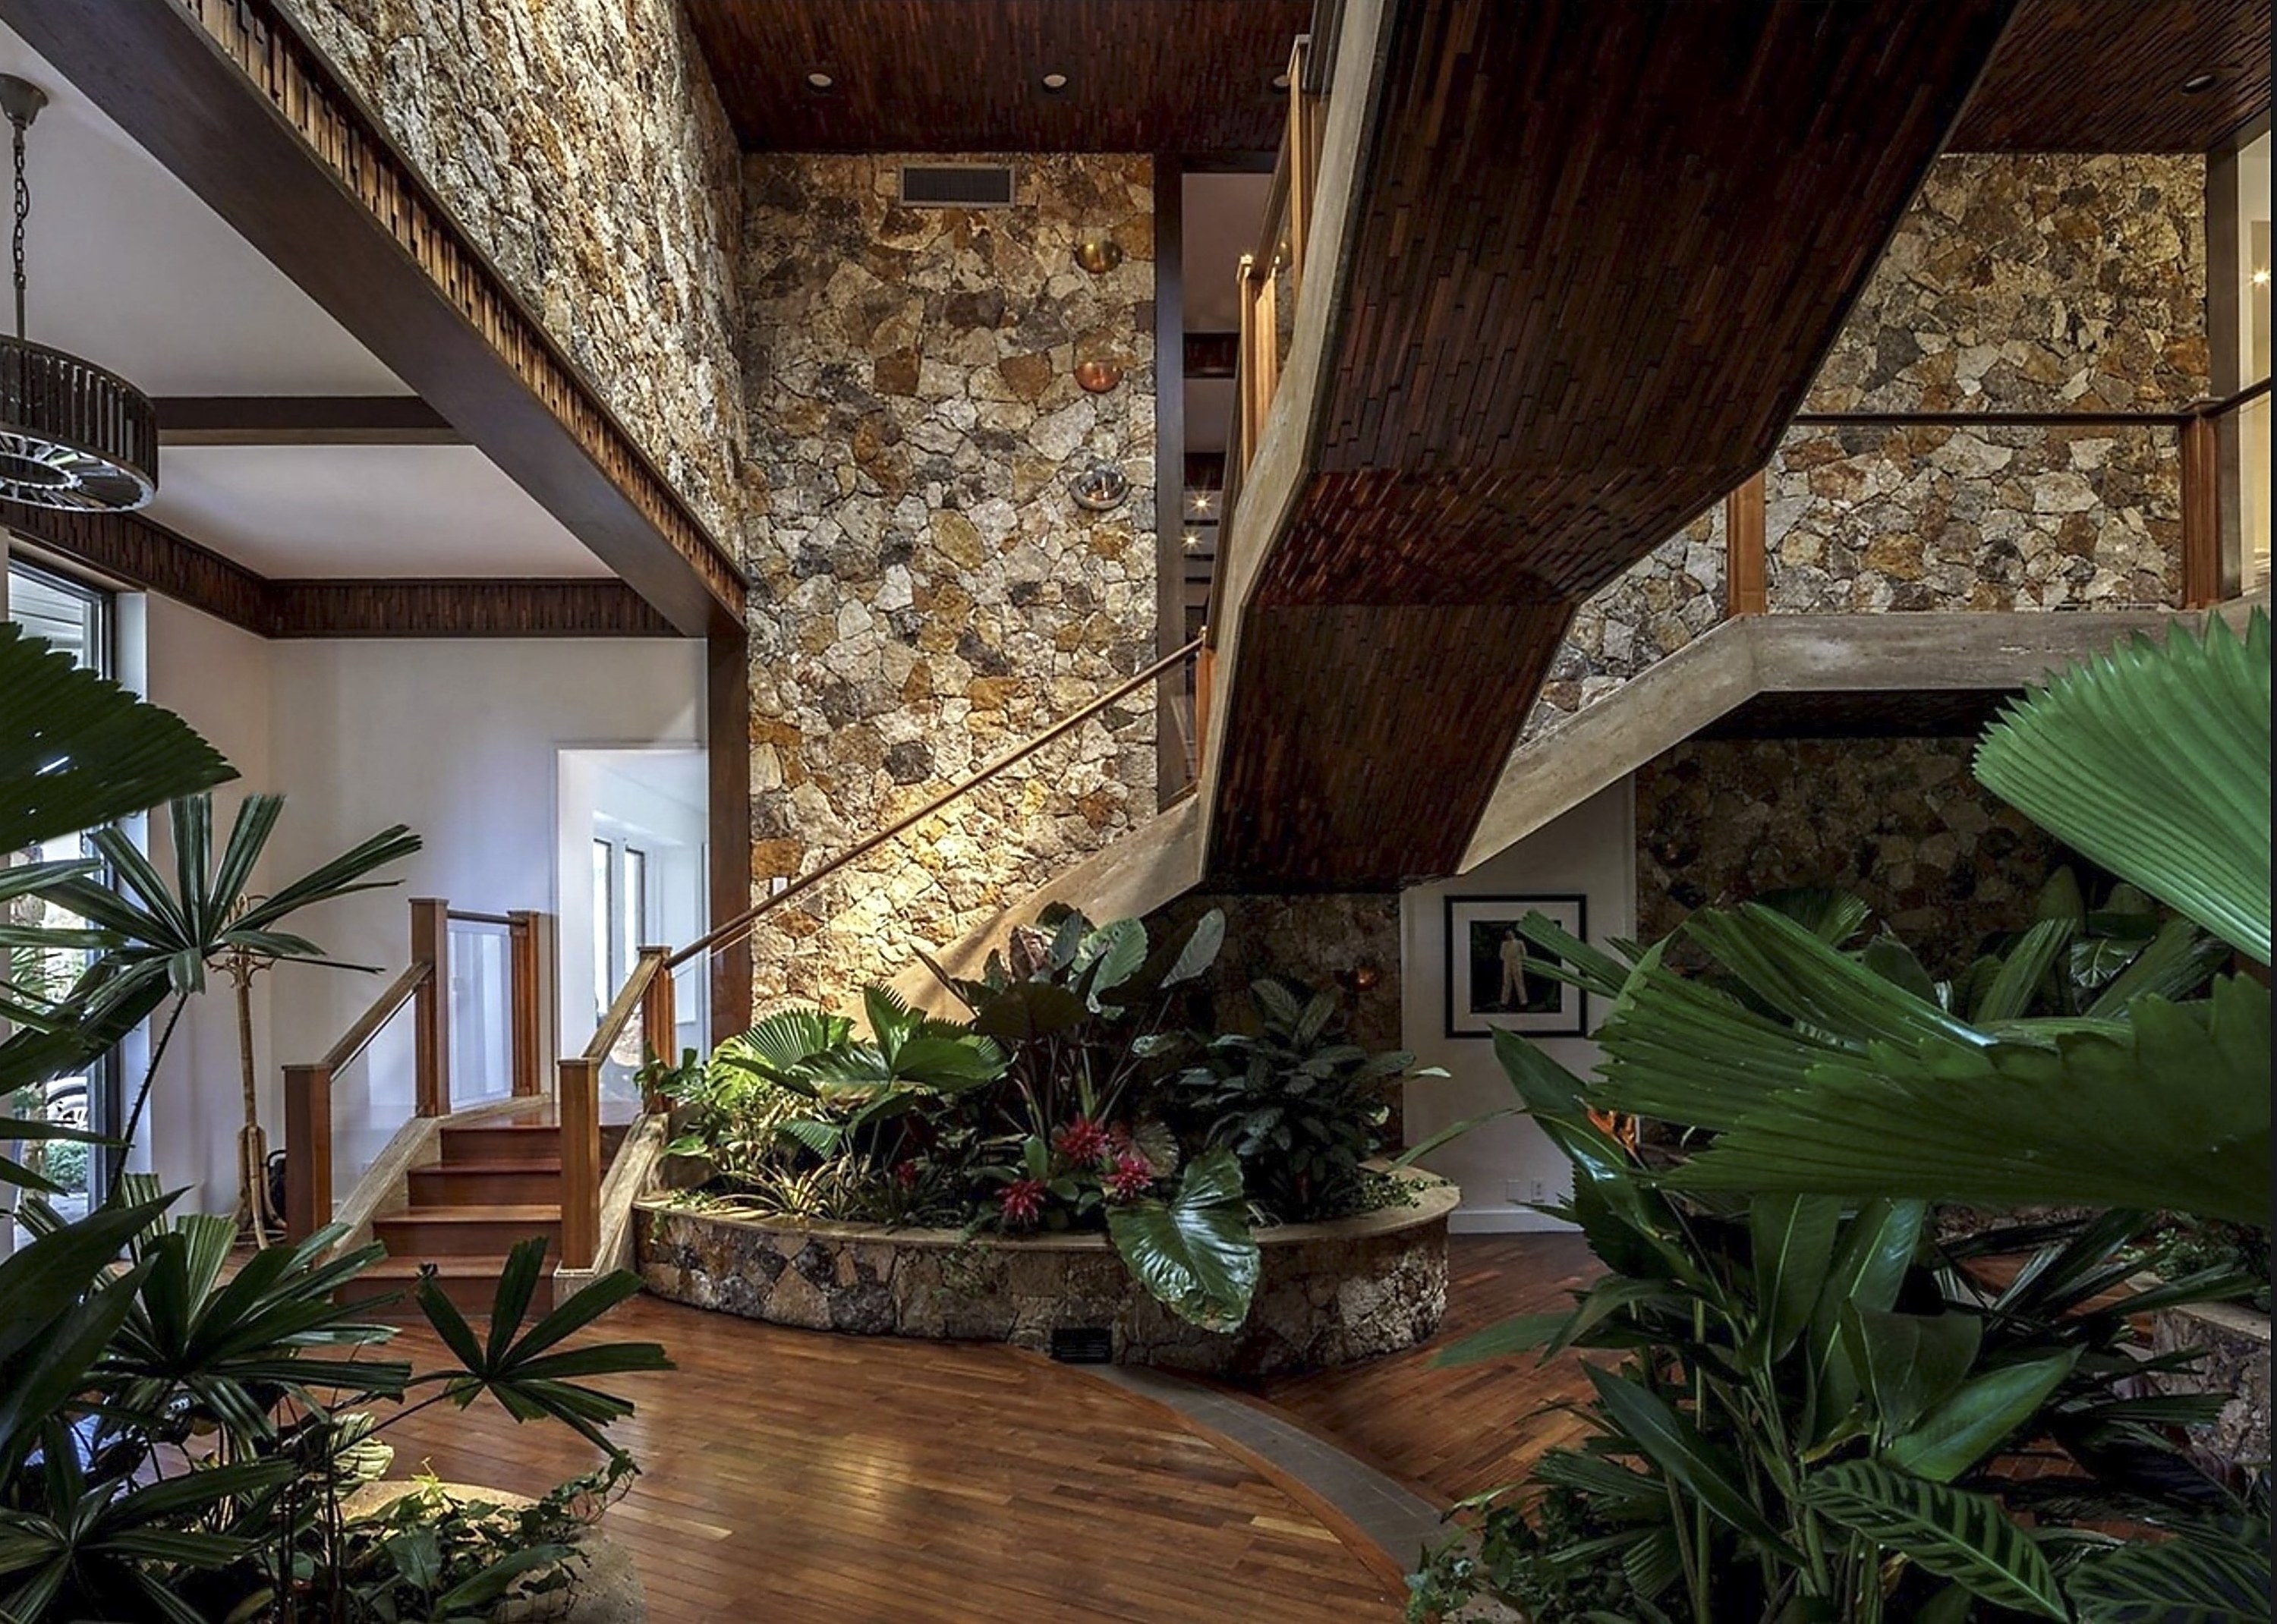 Many plush plants surrounding a spiral staircase and stone wall paneling